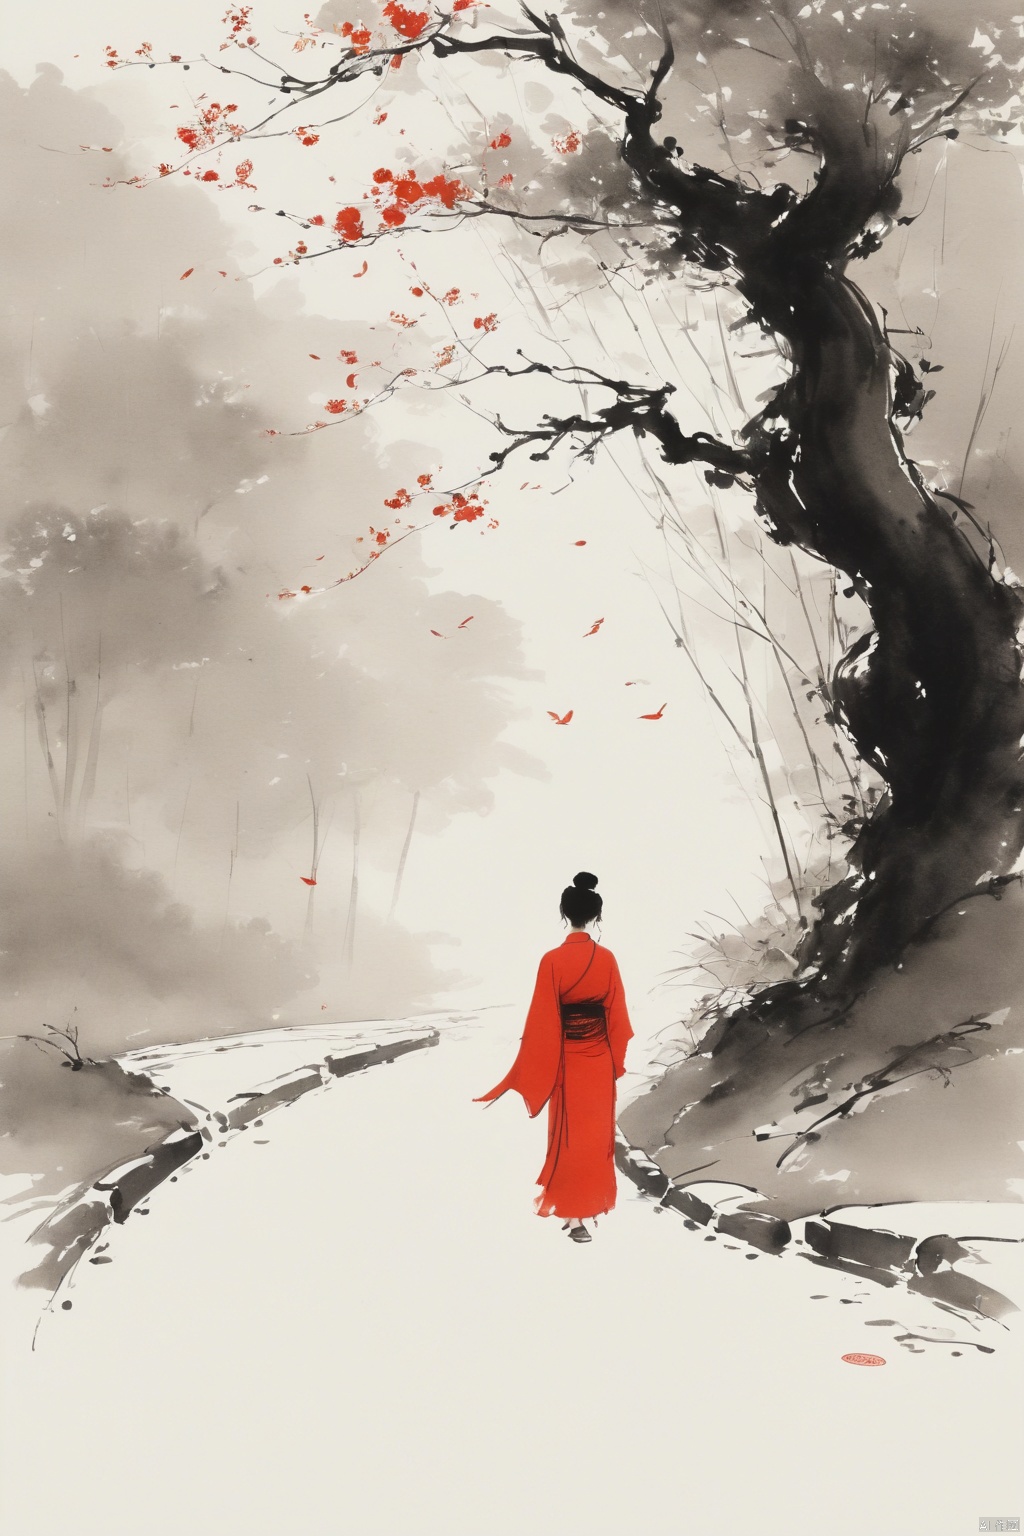 Chinese ink painting,fine and smooth brush strokes,minimalist,Simple lines outline a winding path,chinese ancient woman in red Stand at the end of the road seems to be waiting for something,leave a large area blank,clean white background,feeling of loneliness,zen and ethereal,abstract composition,Ultrawide shot,HD. --no signature,trees